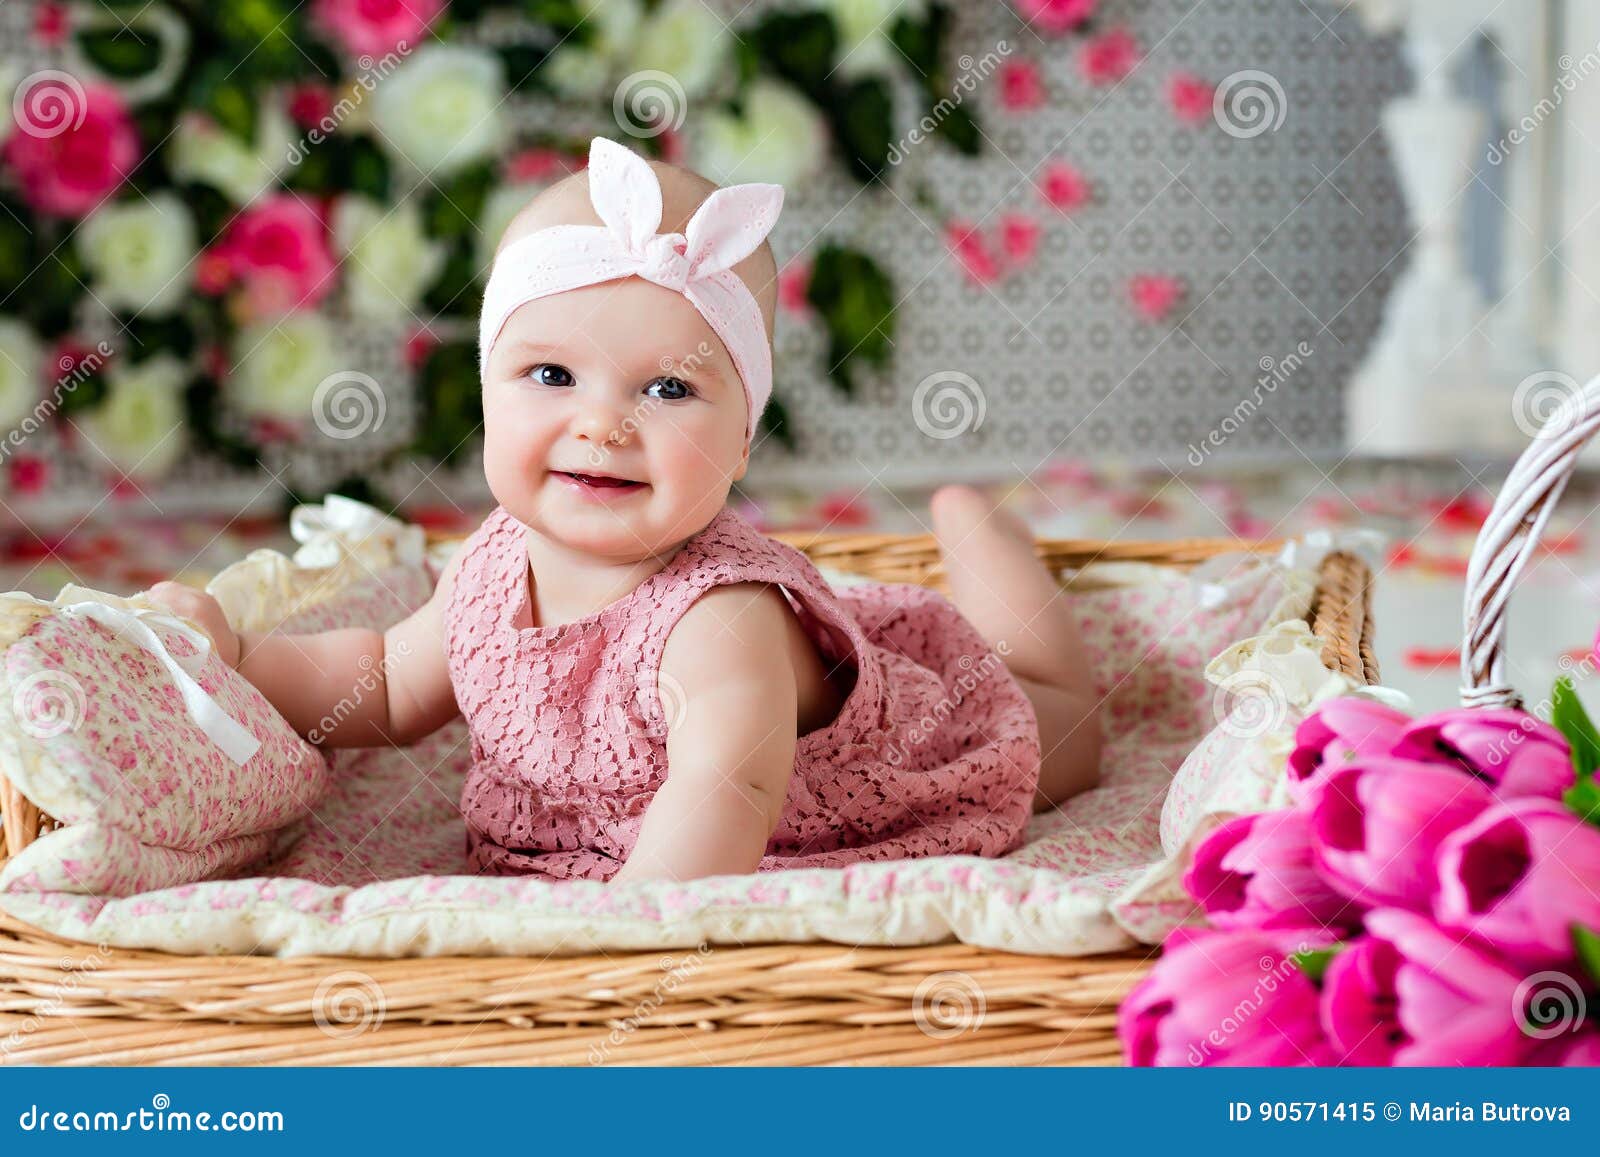 Small Very Cute Wide-eyed Smiling Baby Girl in a Pink Dress Lying ...